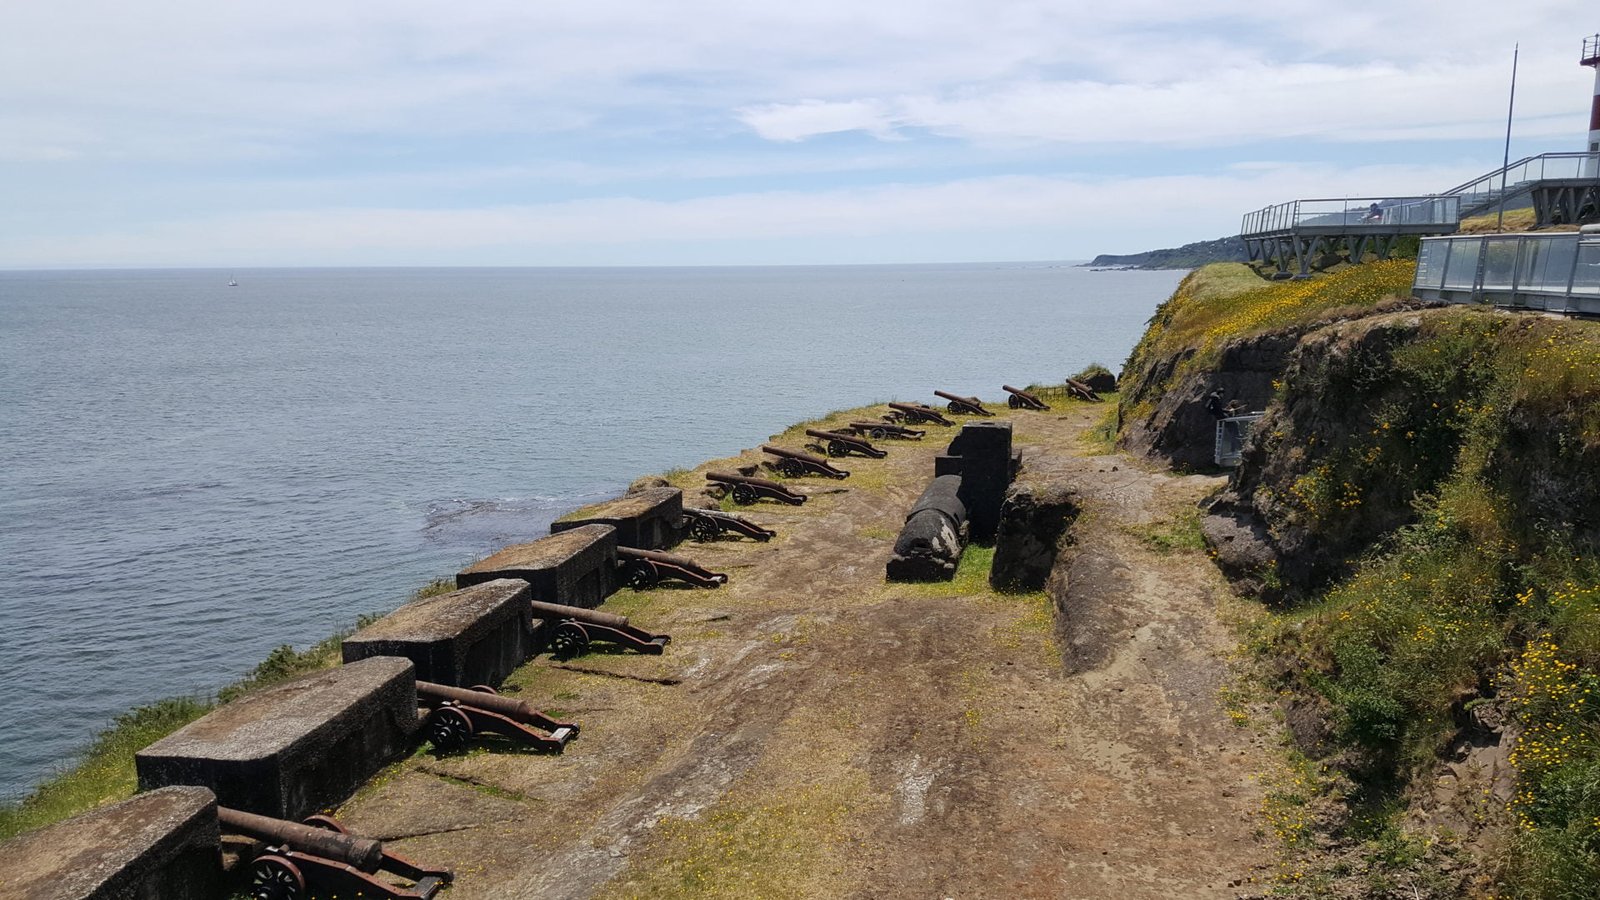 Canons at La Niebla fort while traveling to Valdivia, Chile